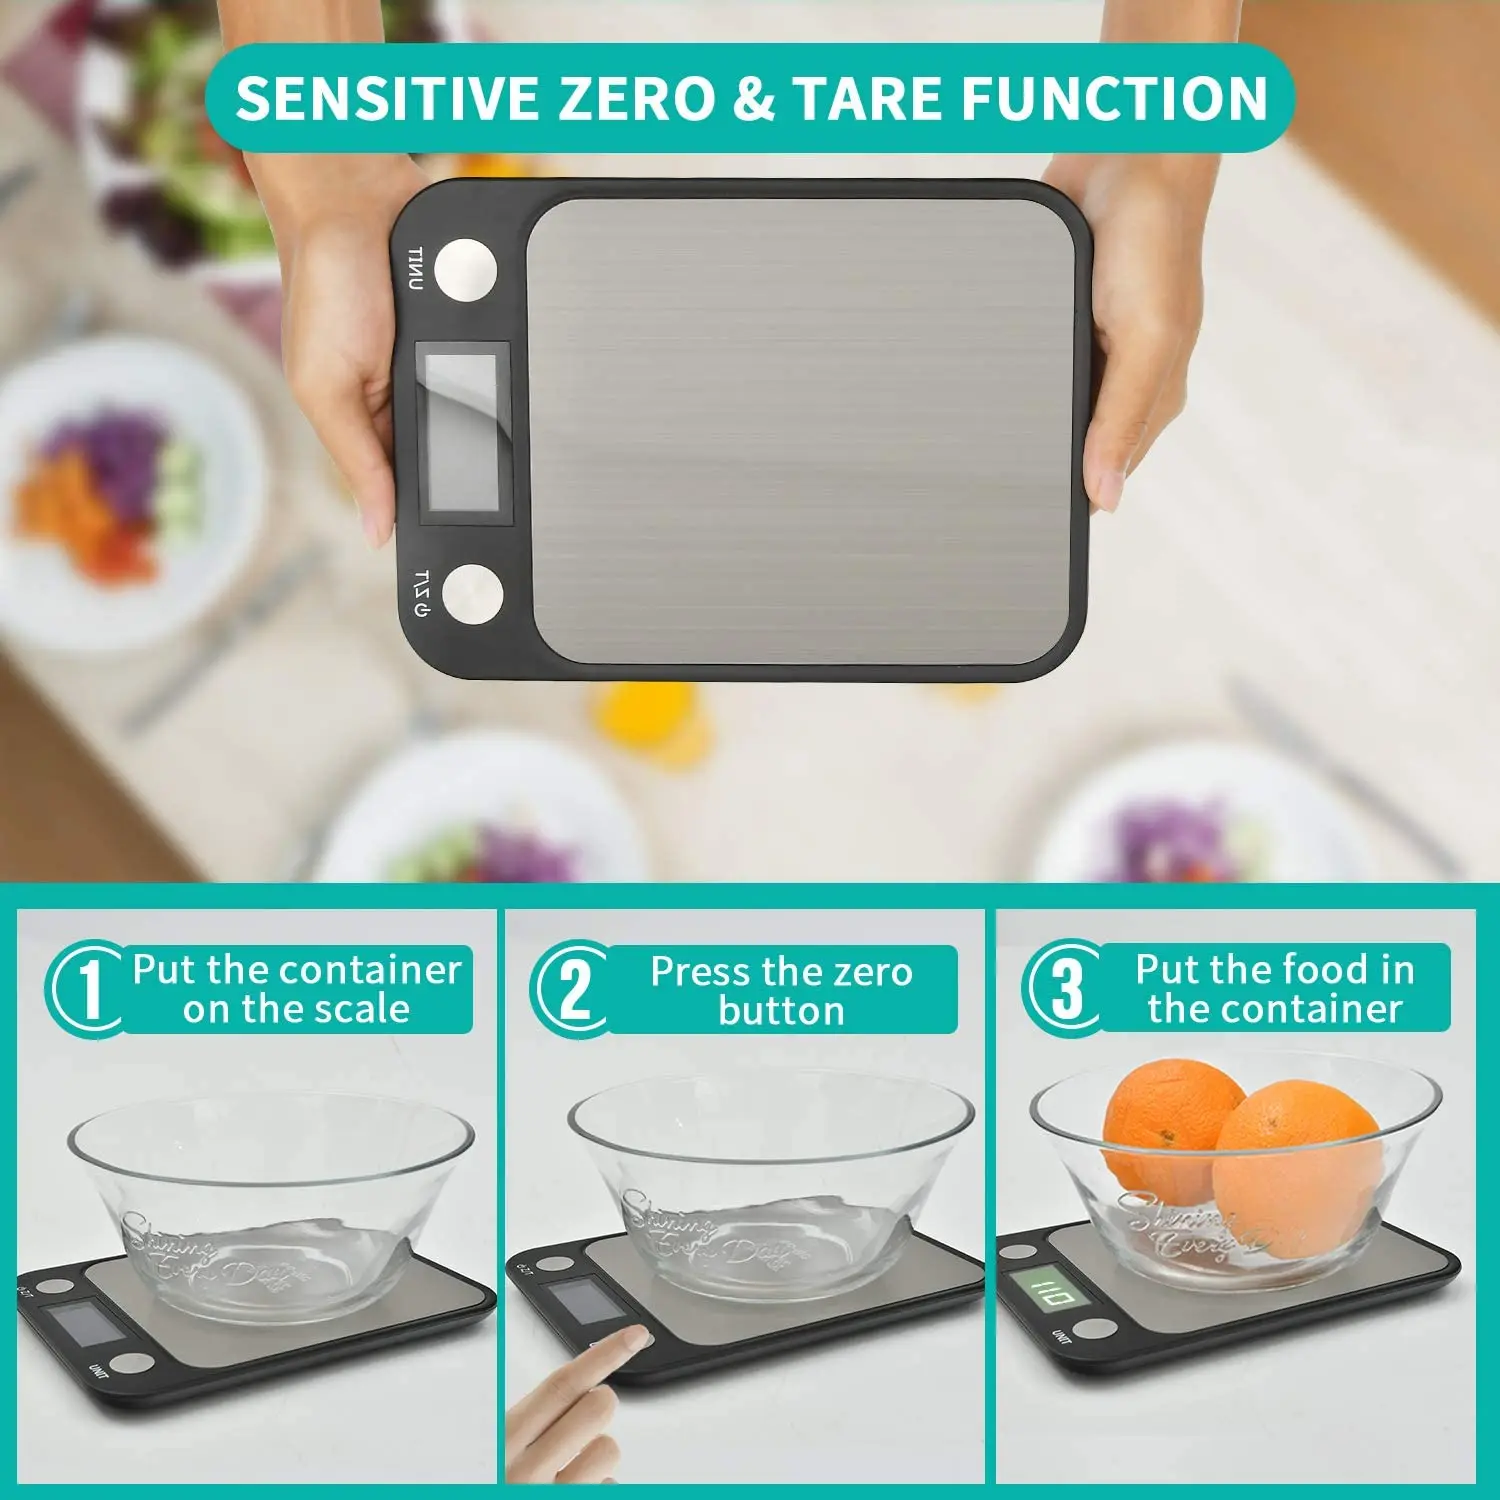 https://ae01.alicdn.com/kf/Hb62e114d53a3434b96c239f5871dffd1u/10kg-1g-Multi-function-Digital-Food-Kitchen-Scale-Stainless-Steel-Weighing-Food-Scale-Cooking-Tools-Balance.jpg